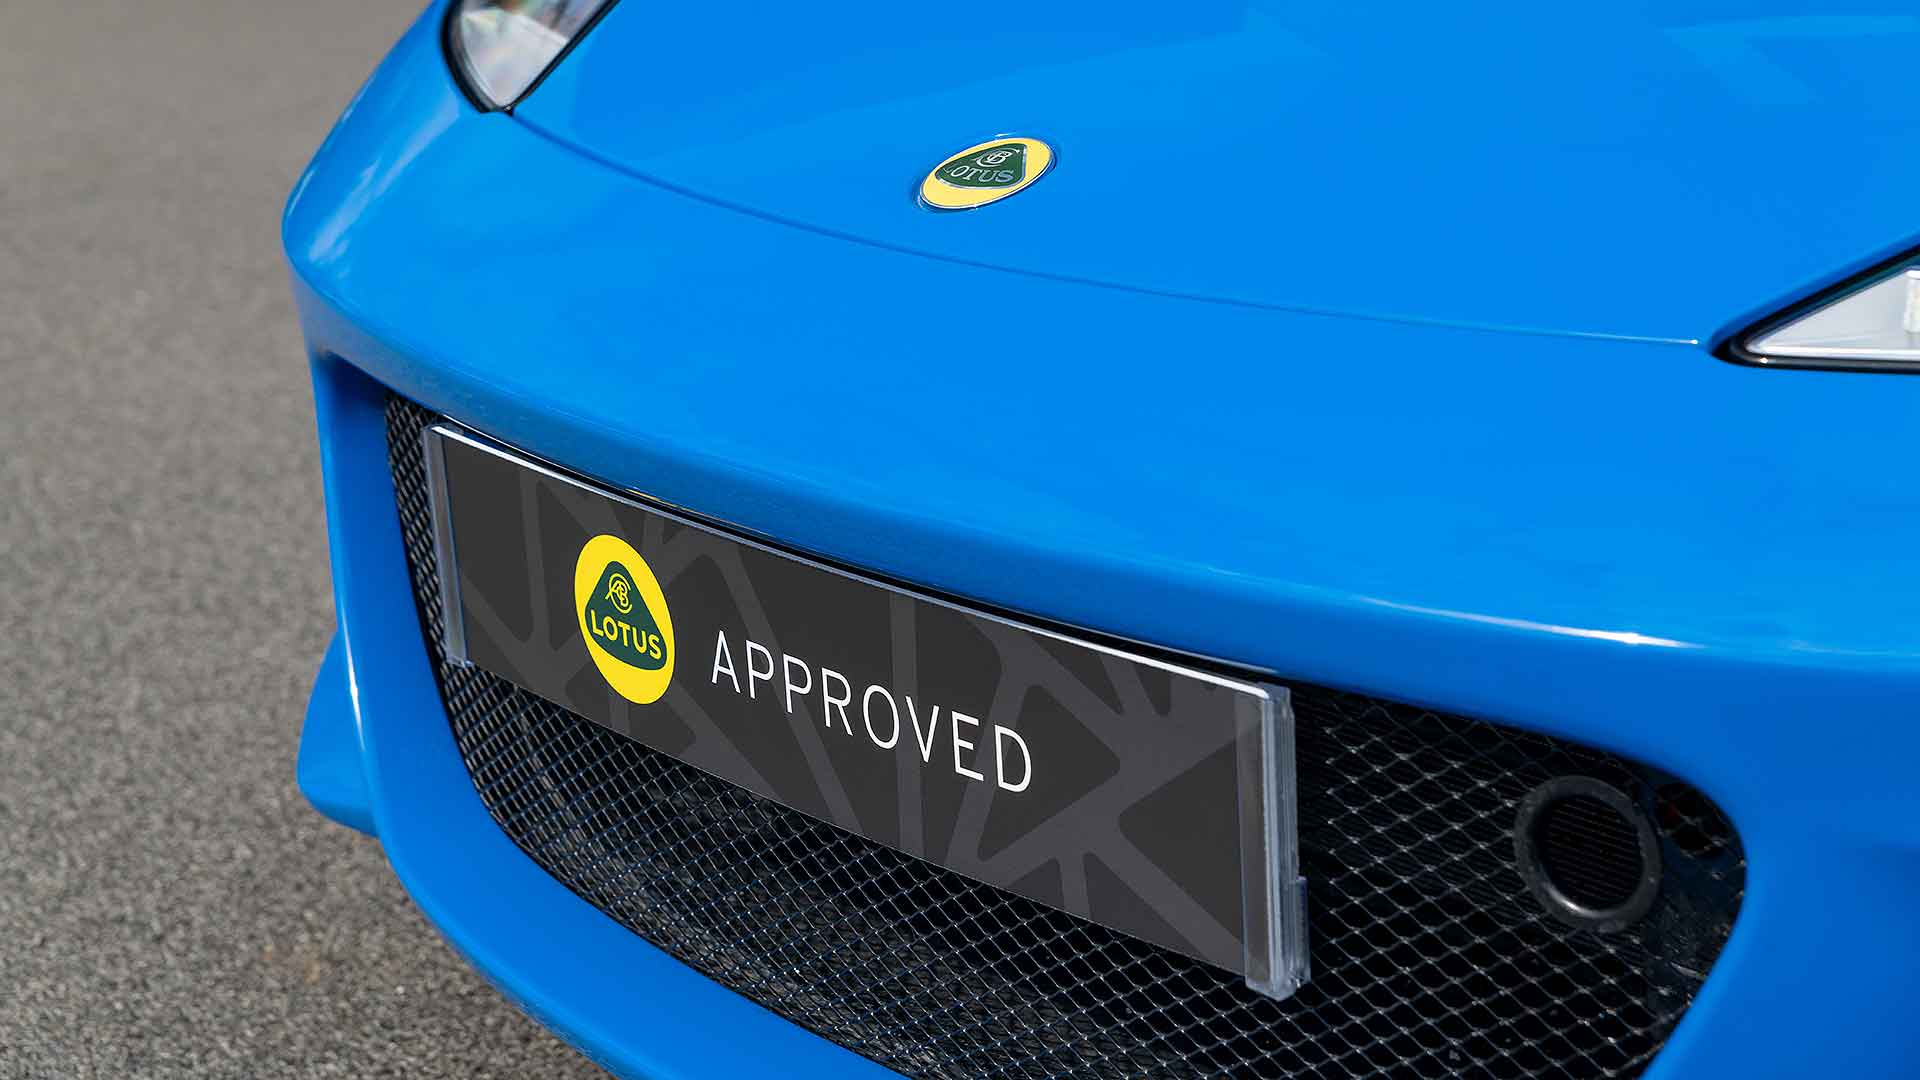 'Lotus Approved' scheme launched for cars up to 20 years old